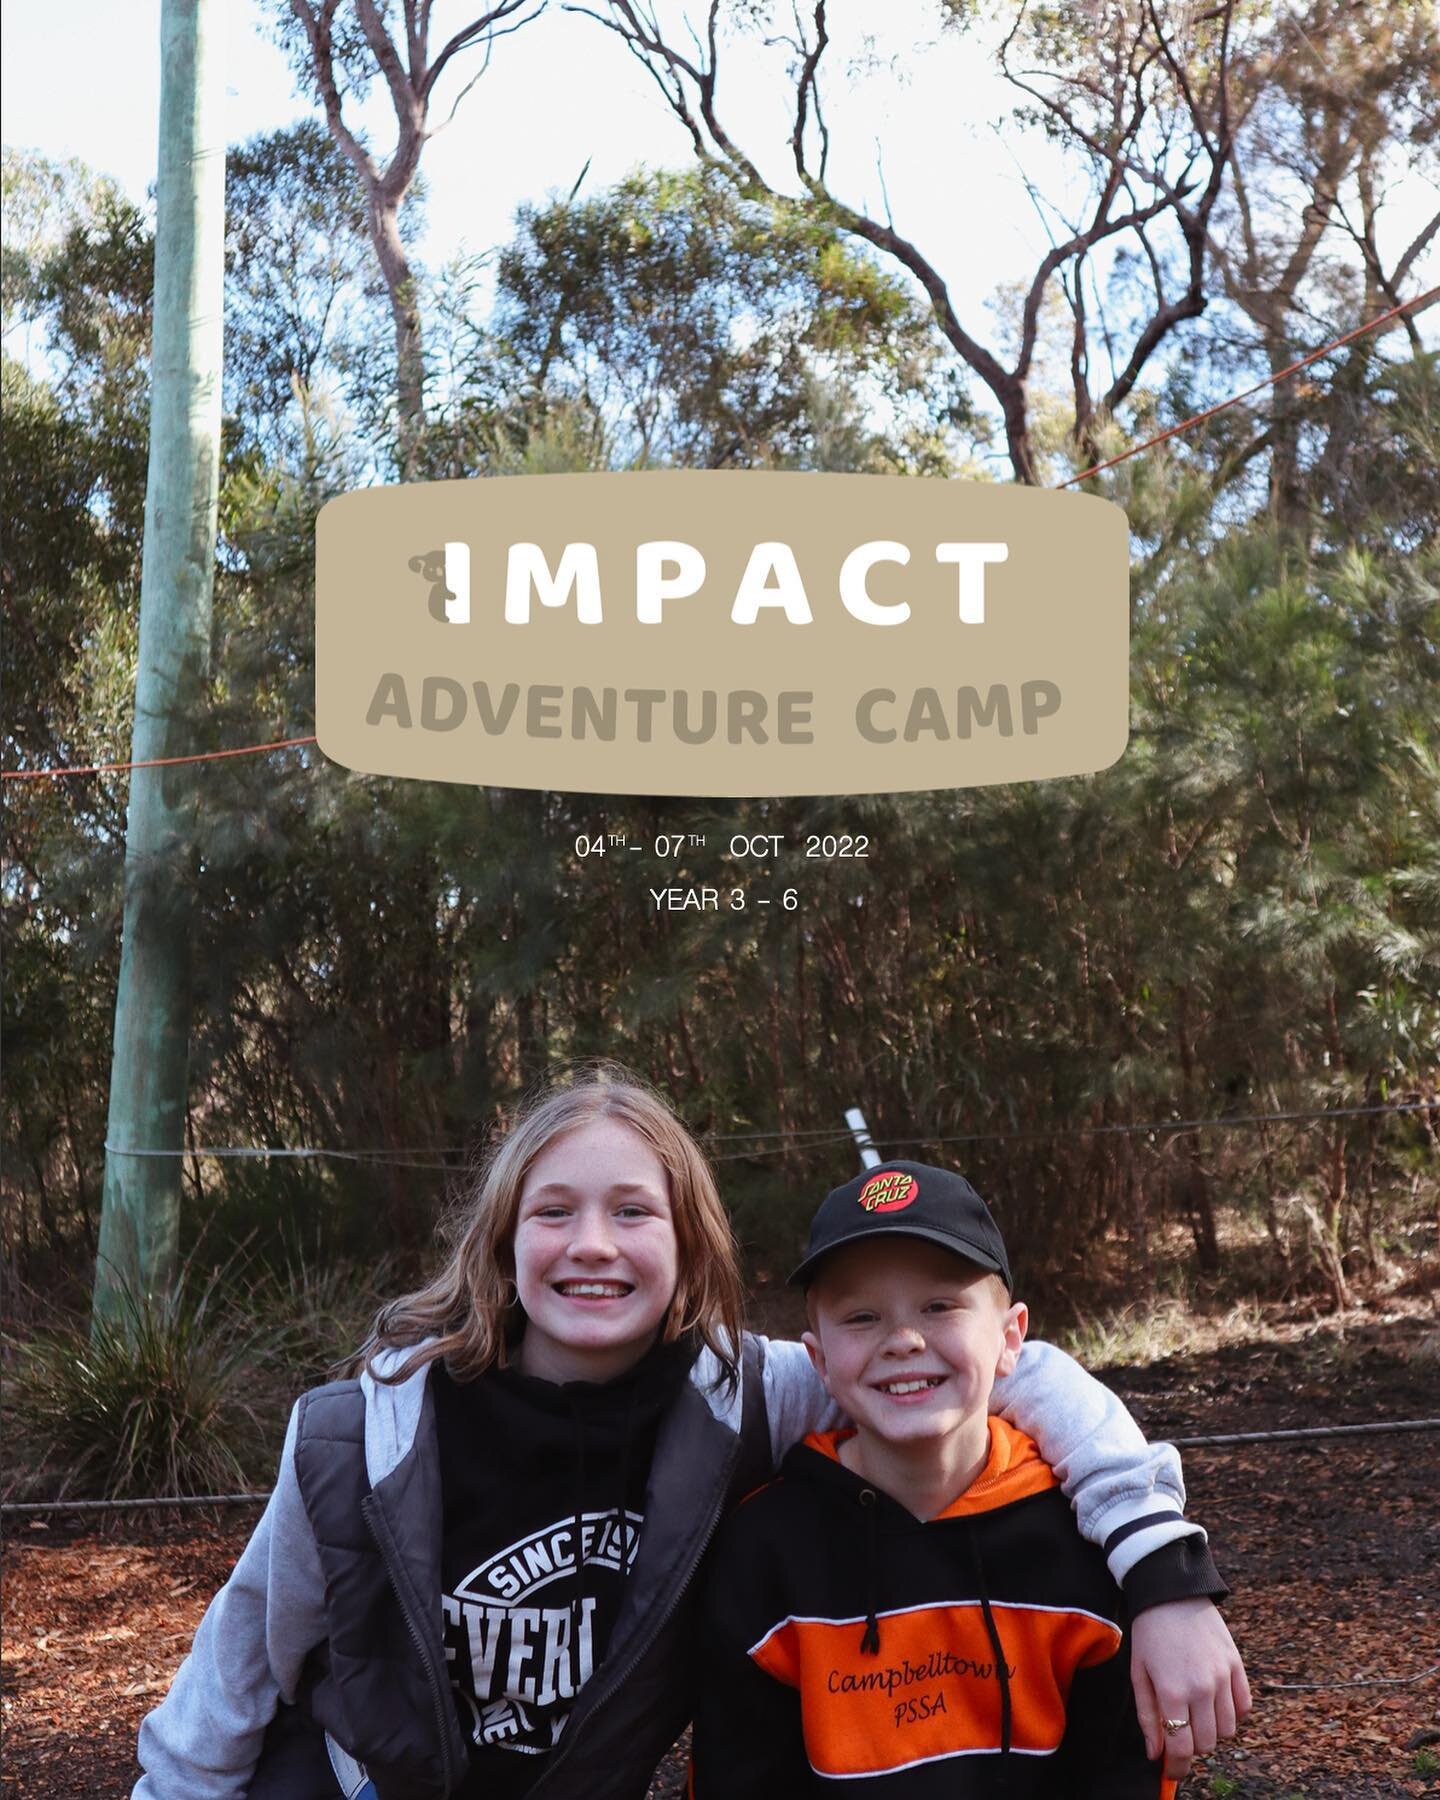 Impact Adventure Camp is just around the corner! 🤩

We&rsquo;re so excited to see our year 3 - 6 friends &amp; to spend some time outside adventuring in the spring sun! 

Join us on the 4th till the 7th of October &amp; bring some friends 😊 Enrol t